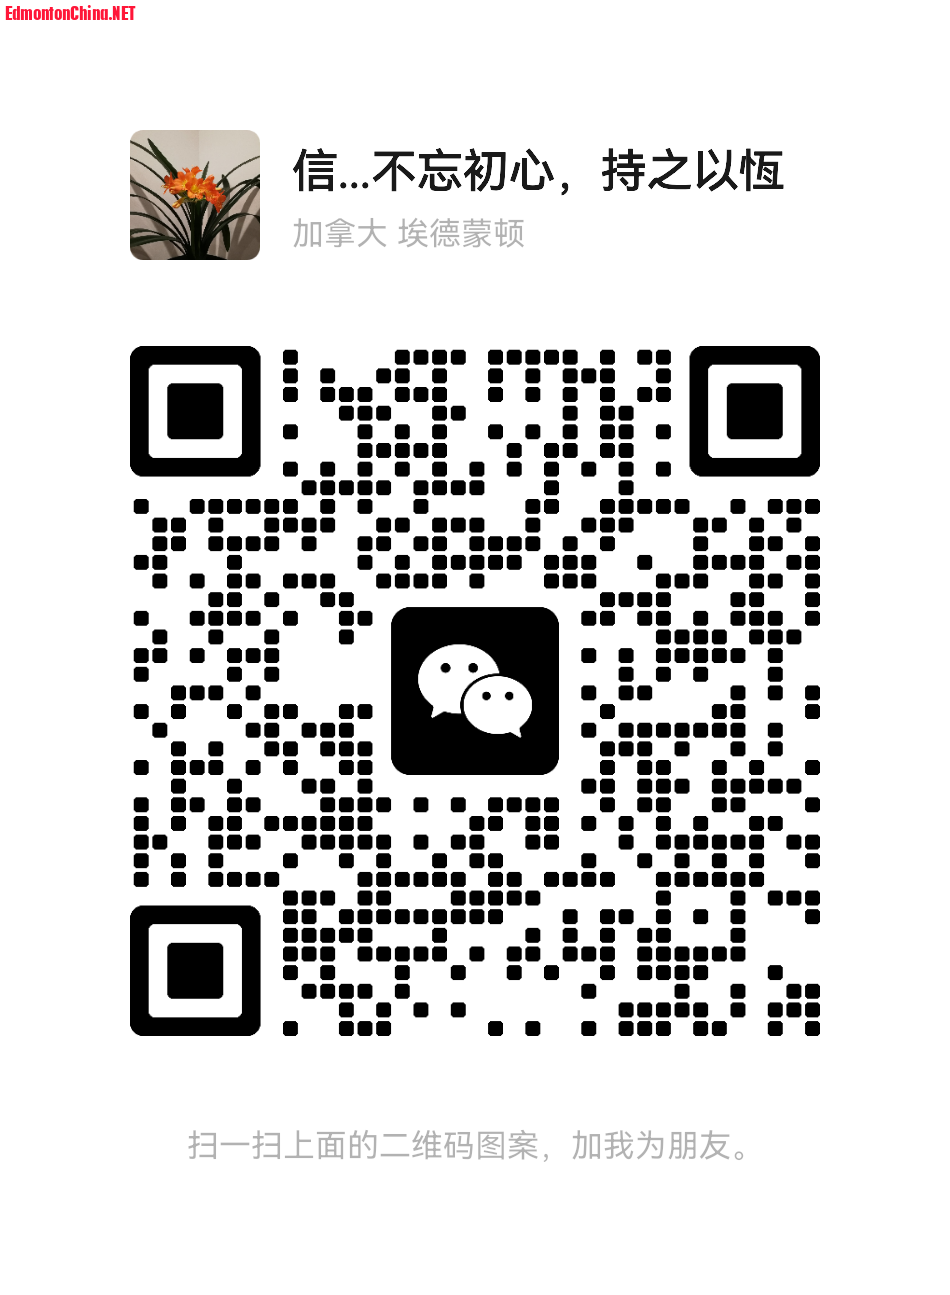 mmqrcode1690857675873.png